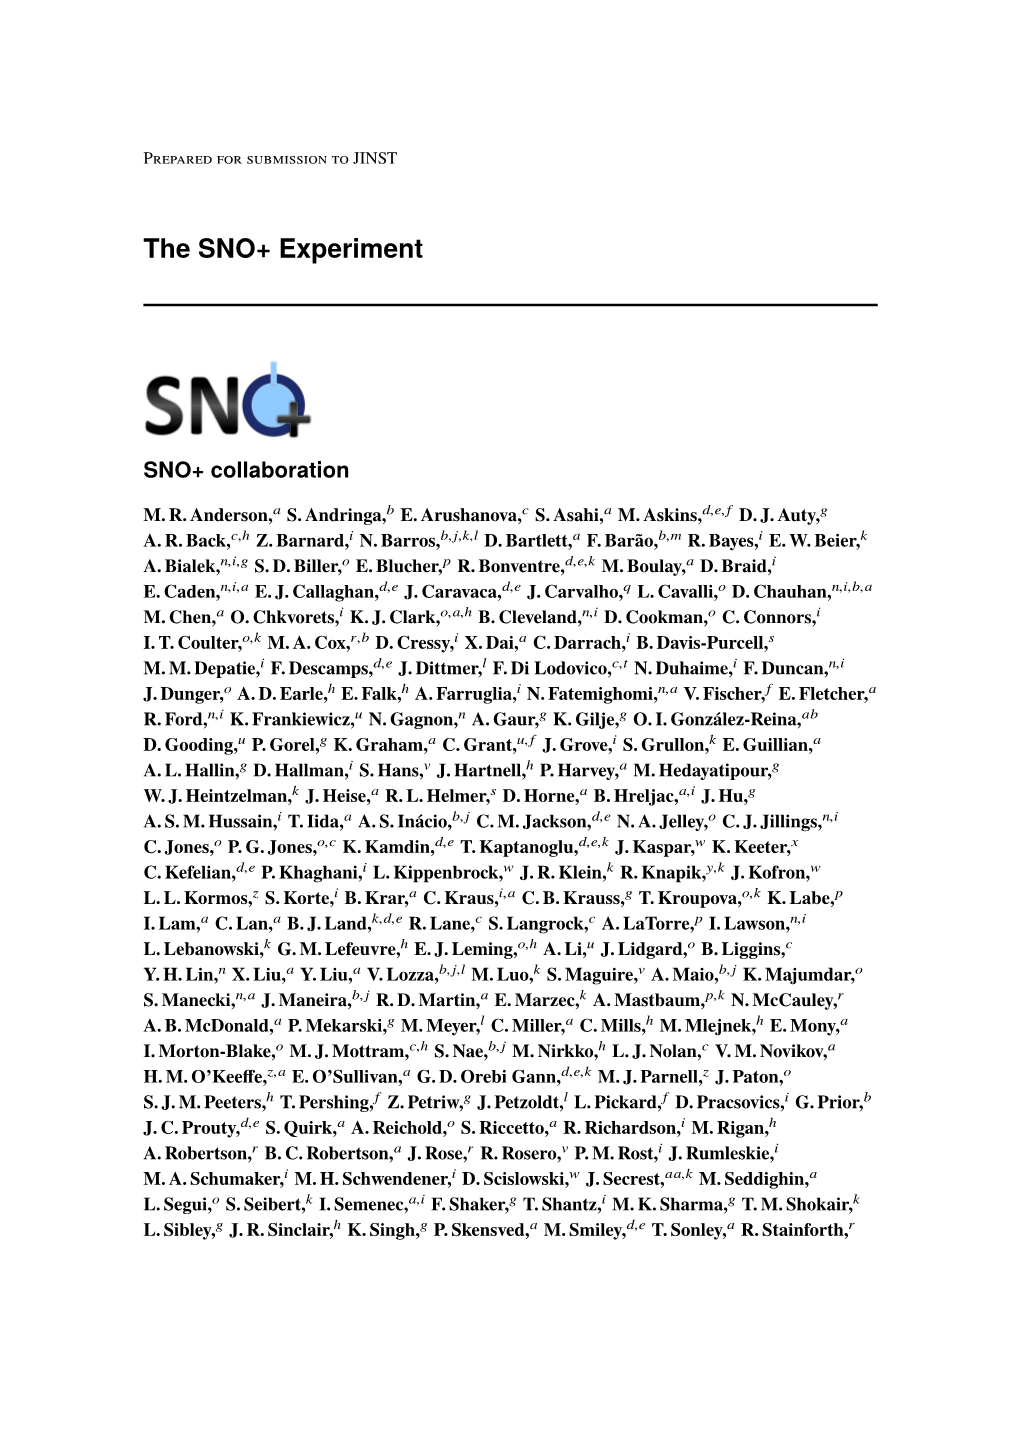 The SNO+ Experiment